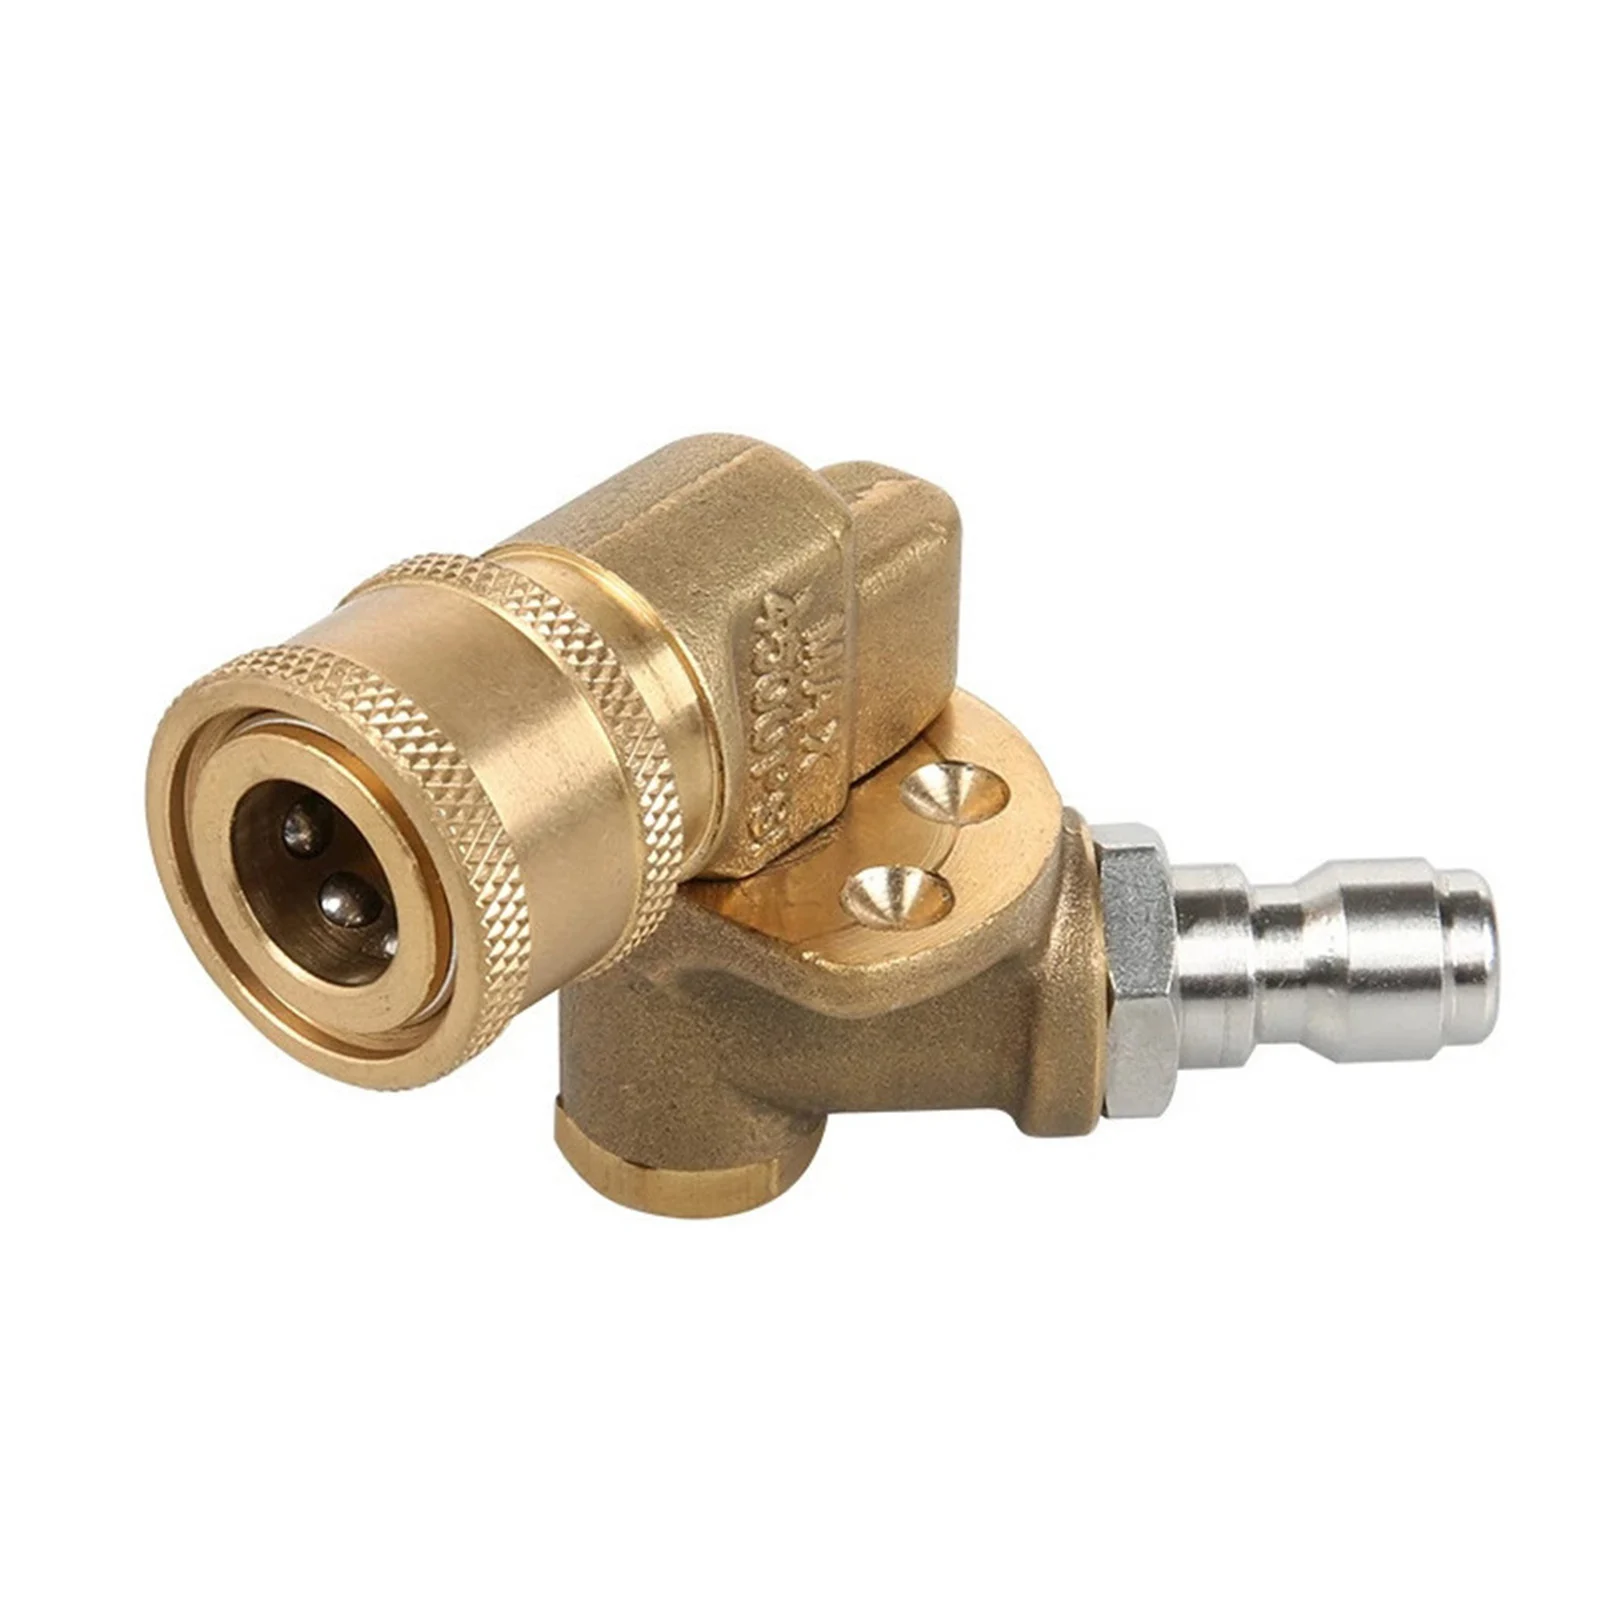 

Dead Angle Car Pressure Washer Quick Connecting Accessories Pivoting Coupler Brass Spray Nozzle 4500PSI Adjustable 5 Angles